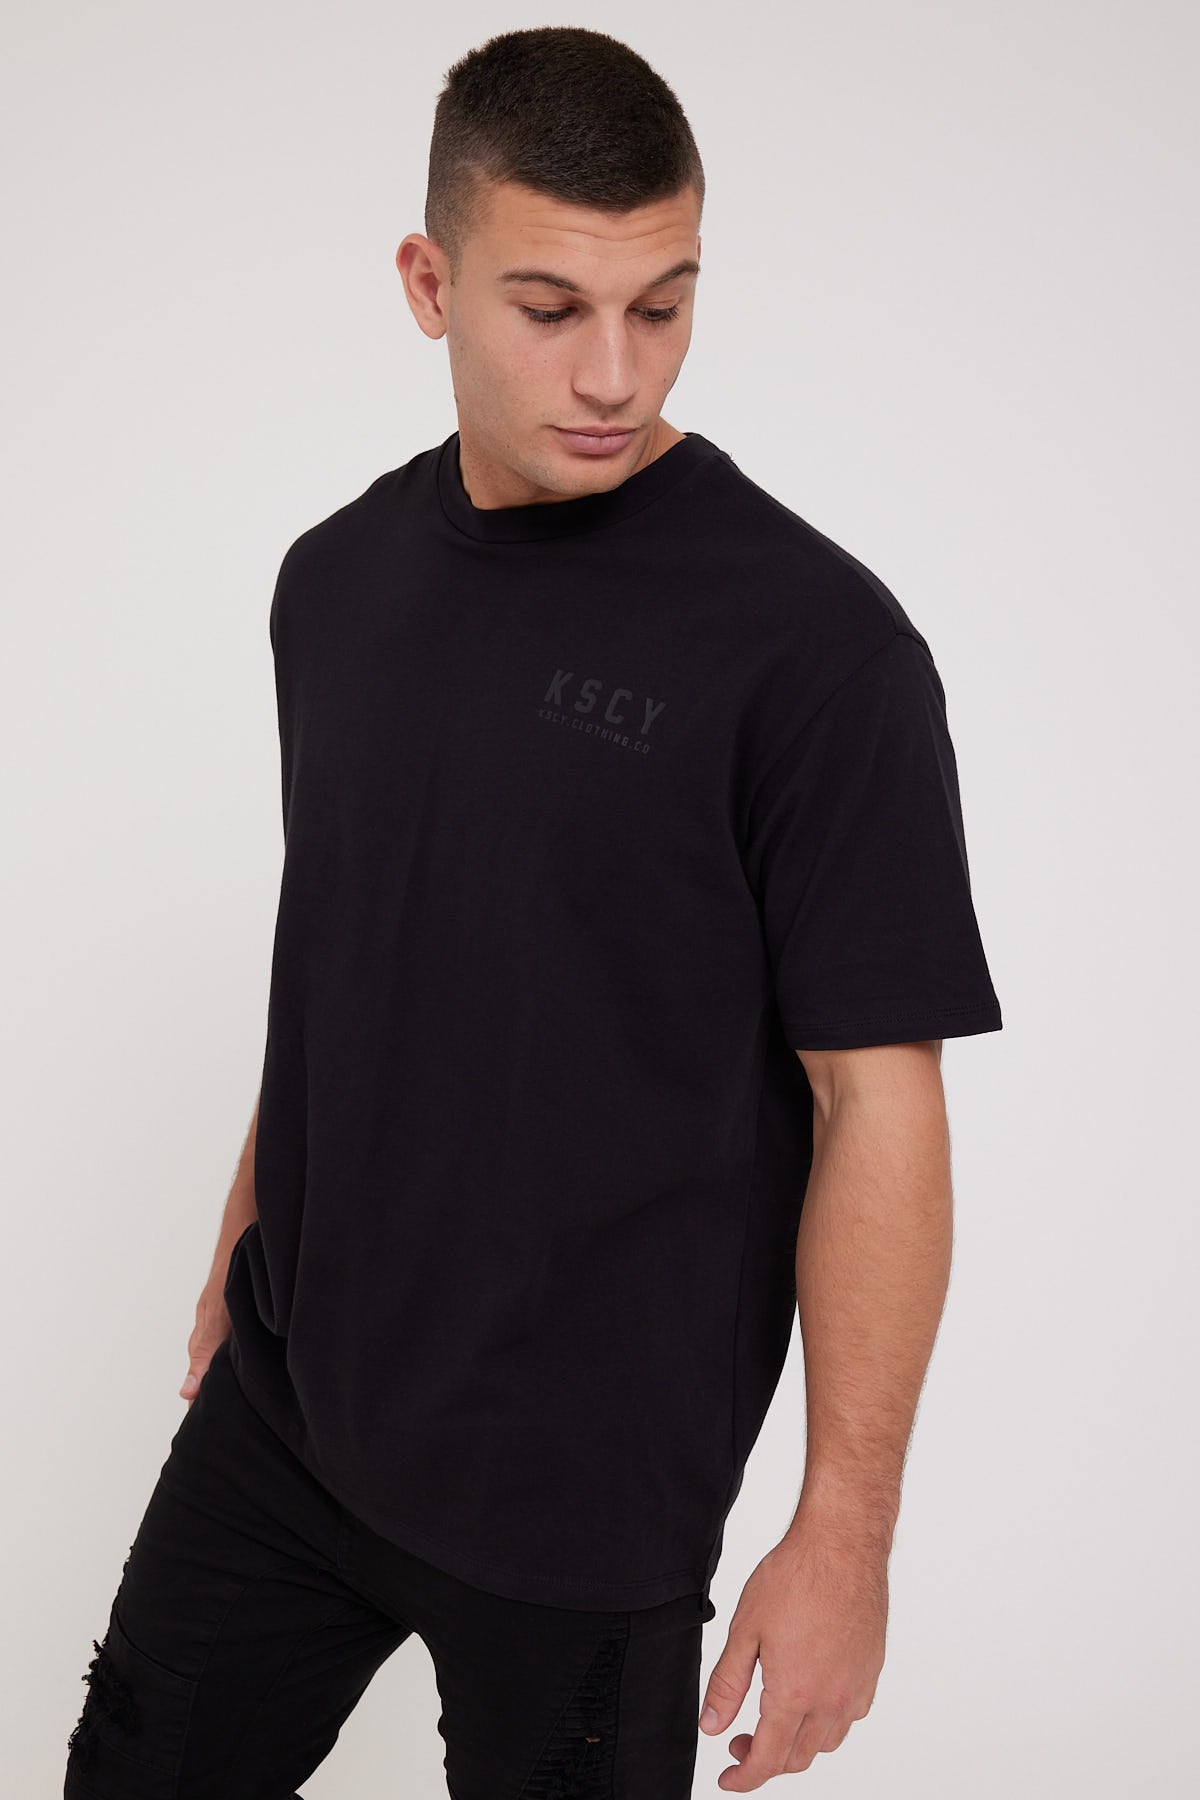 Kiss Chacey D.O.S Box Fit Tee Jet Black